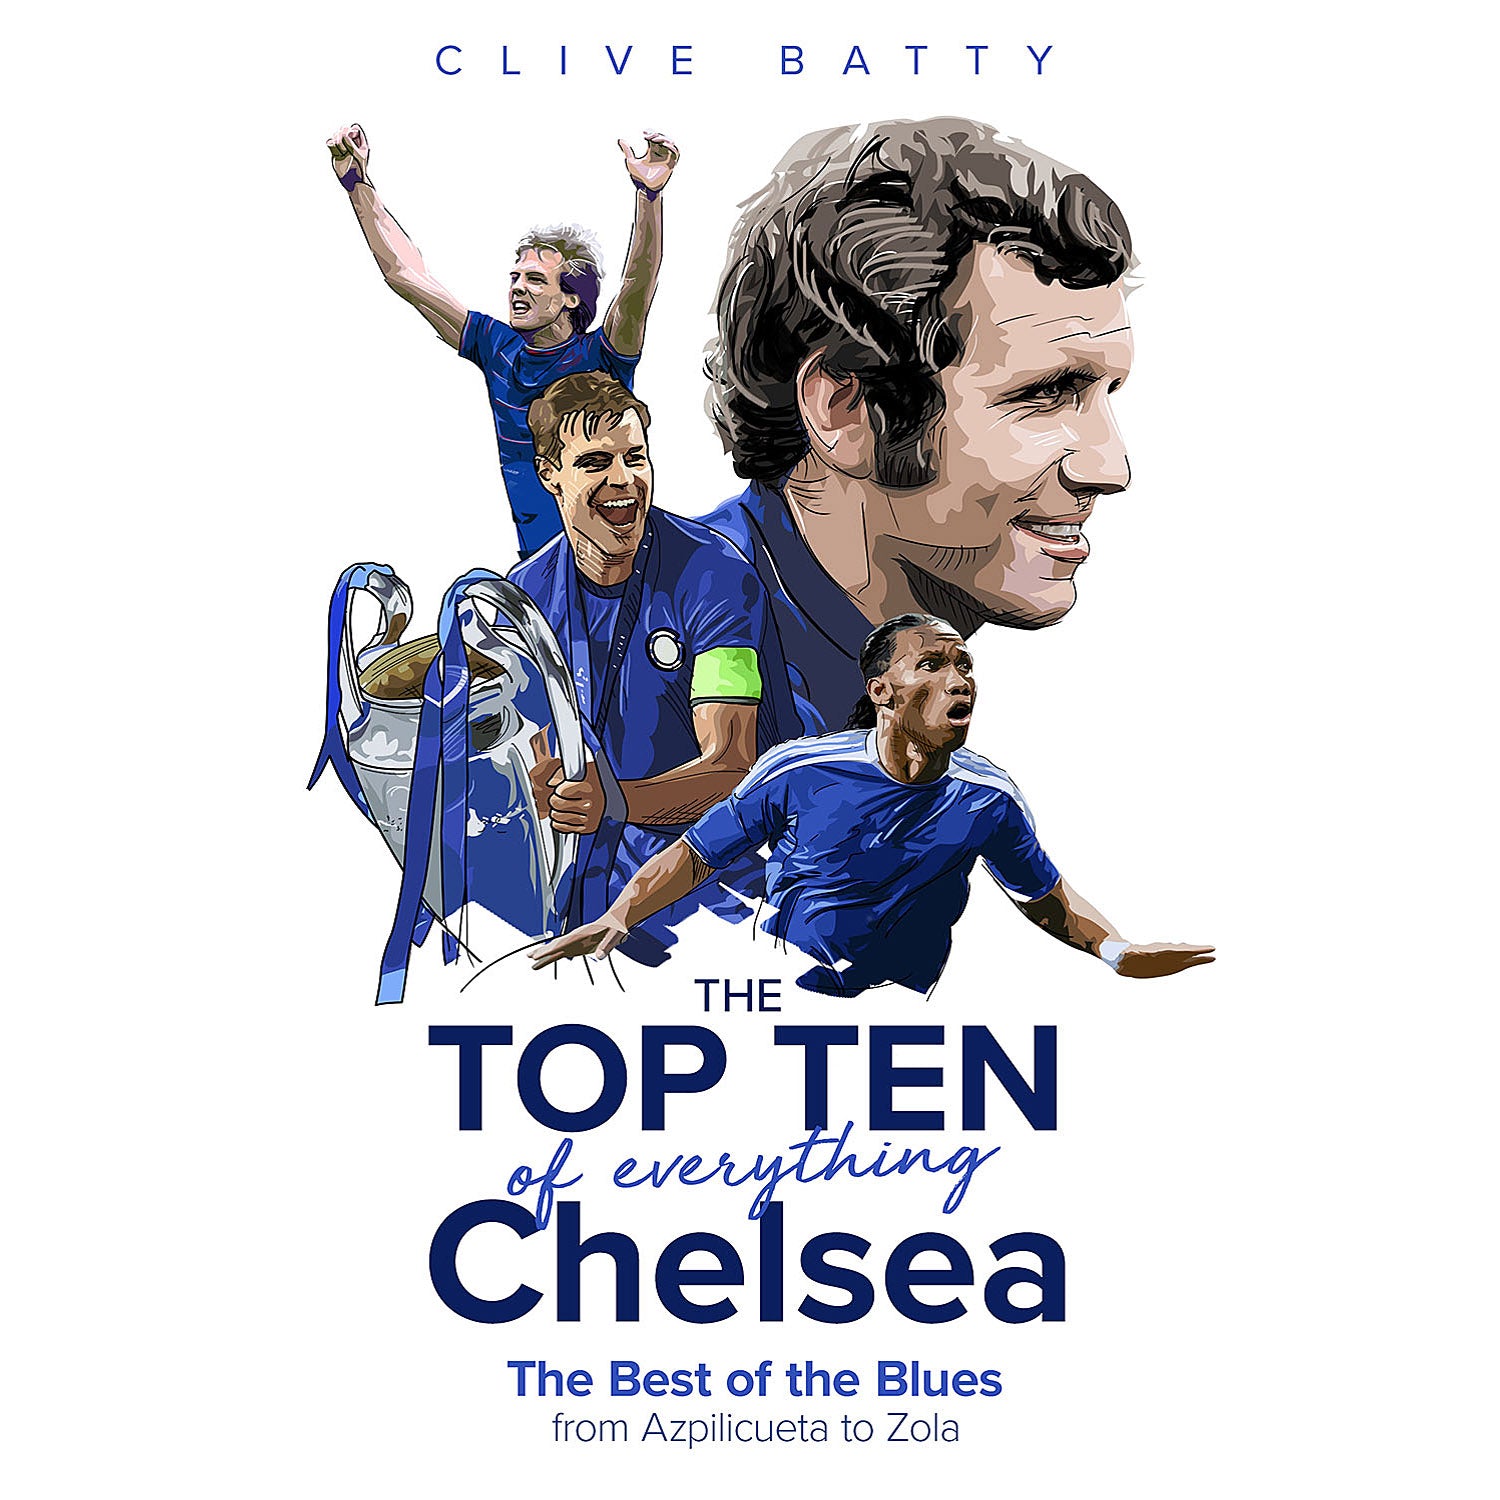 The Top Ten of Everything Chelsea – The Best of the Blues from Azpilicueta to Zola